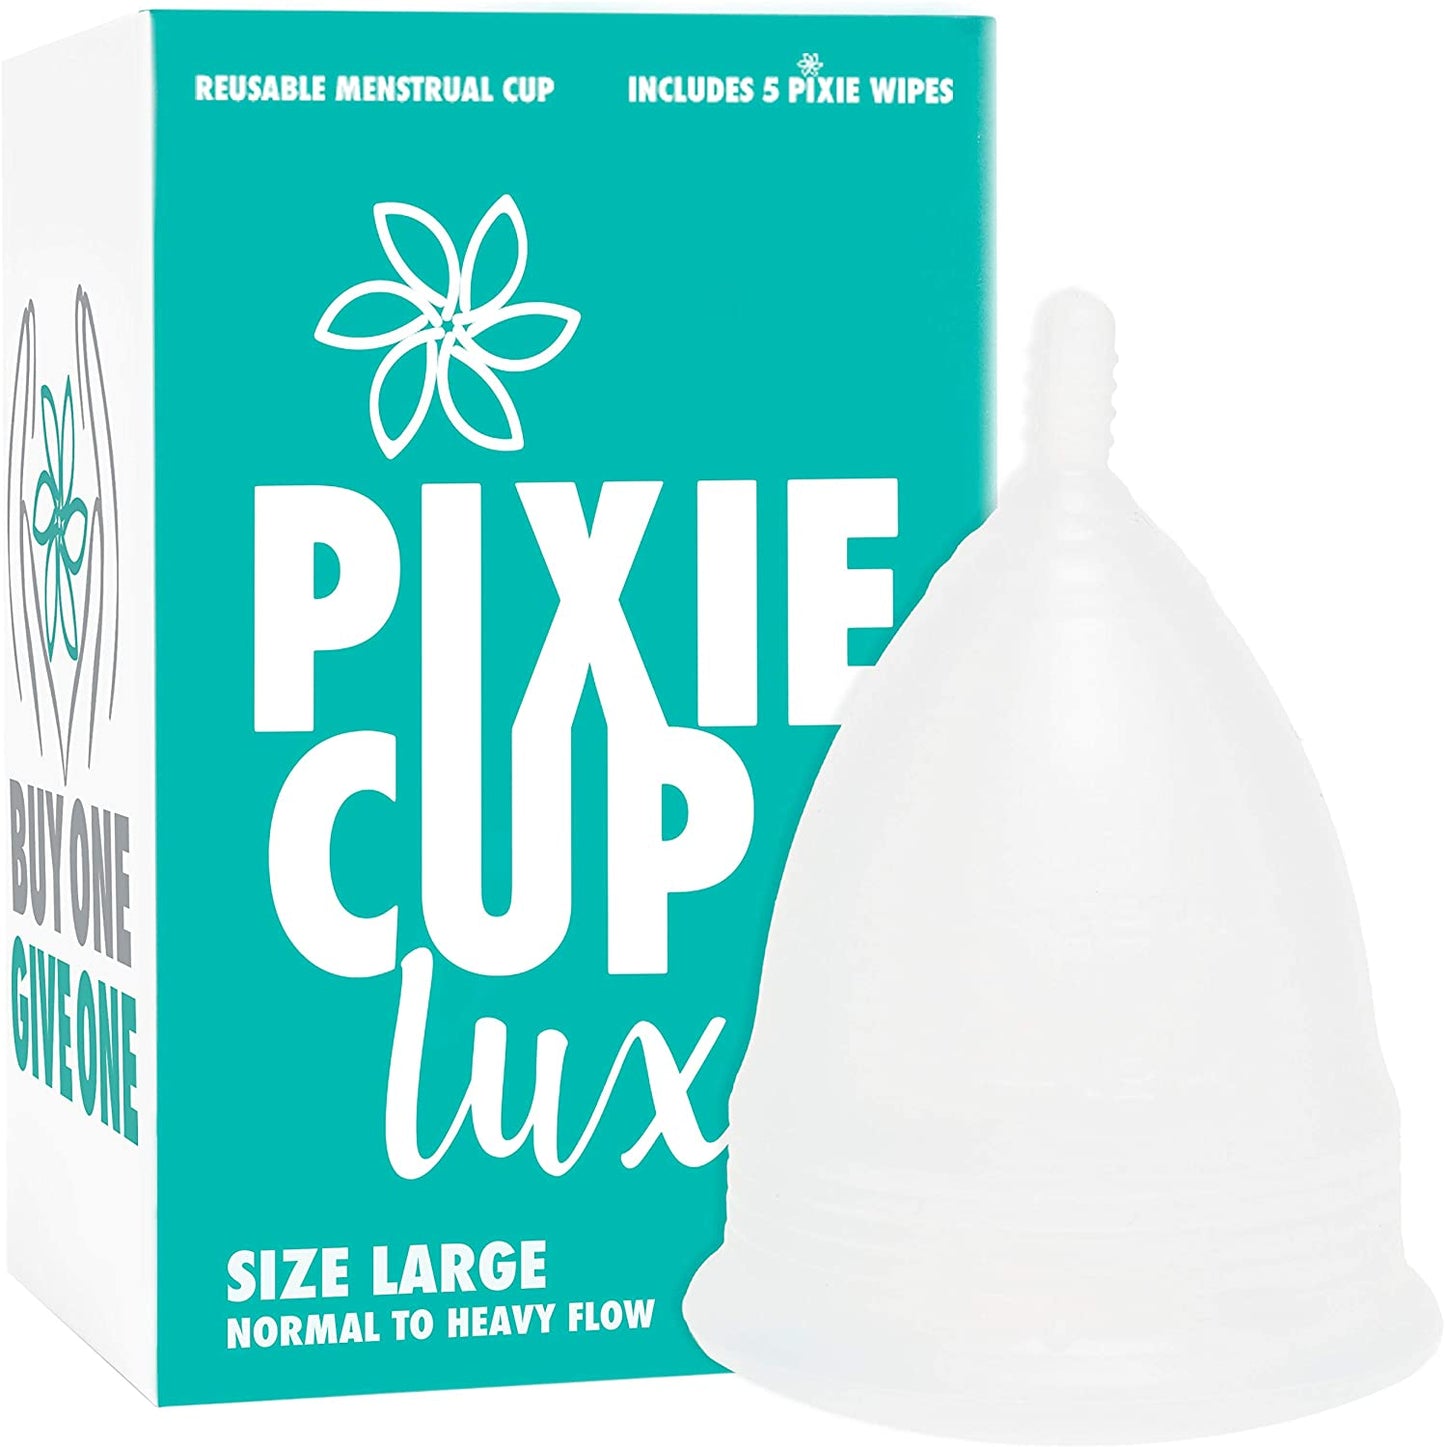 Pixie Cup Luxe